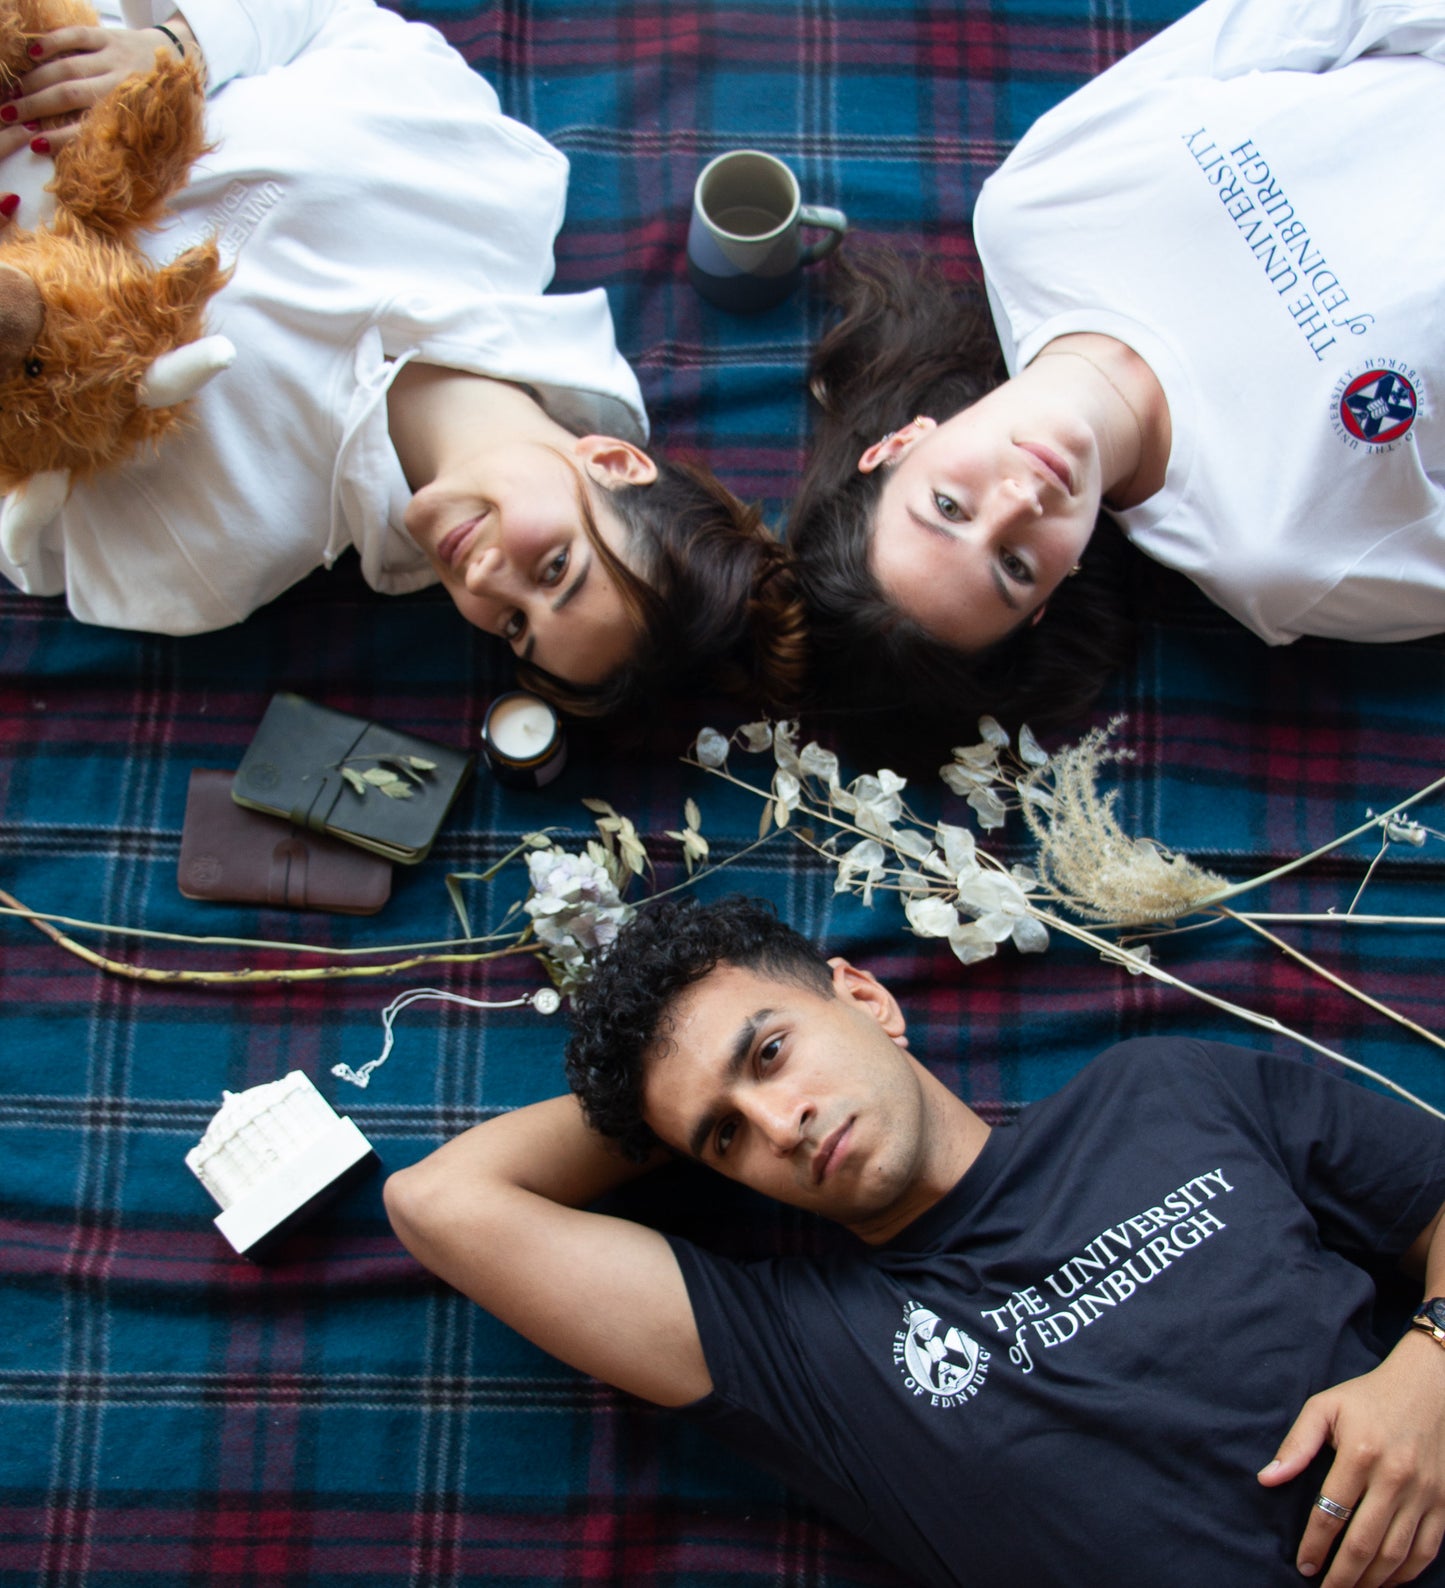 3 models lying on the university tartan picnis blanket with a6 leather note books, flowers and mcewan hall model